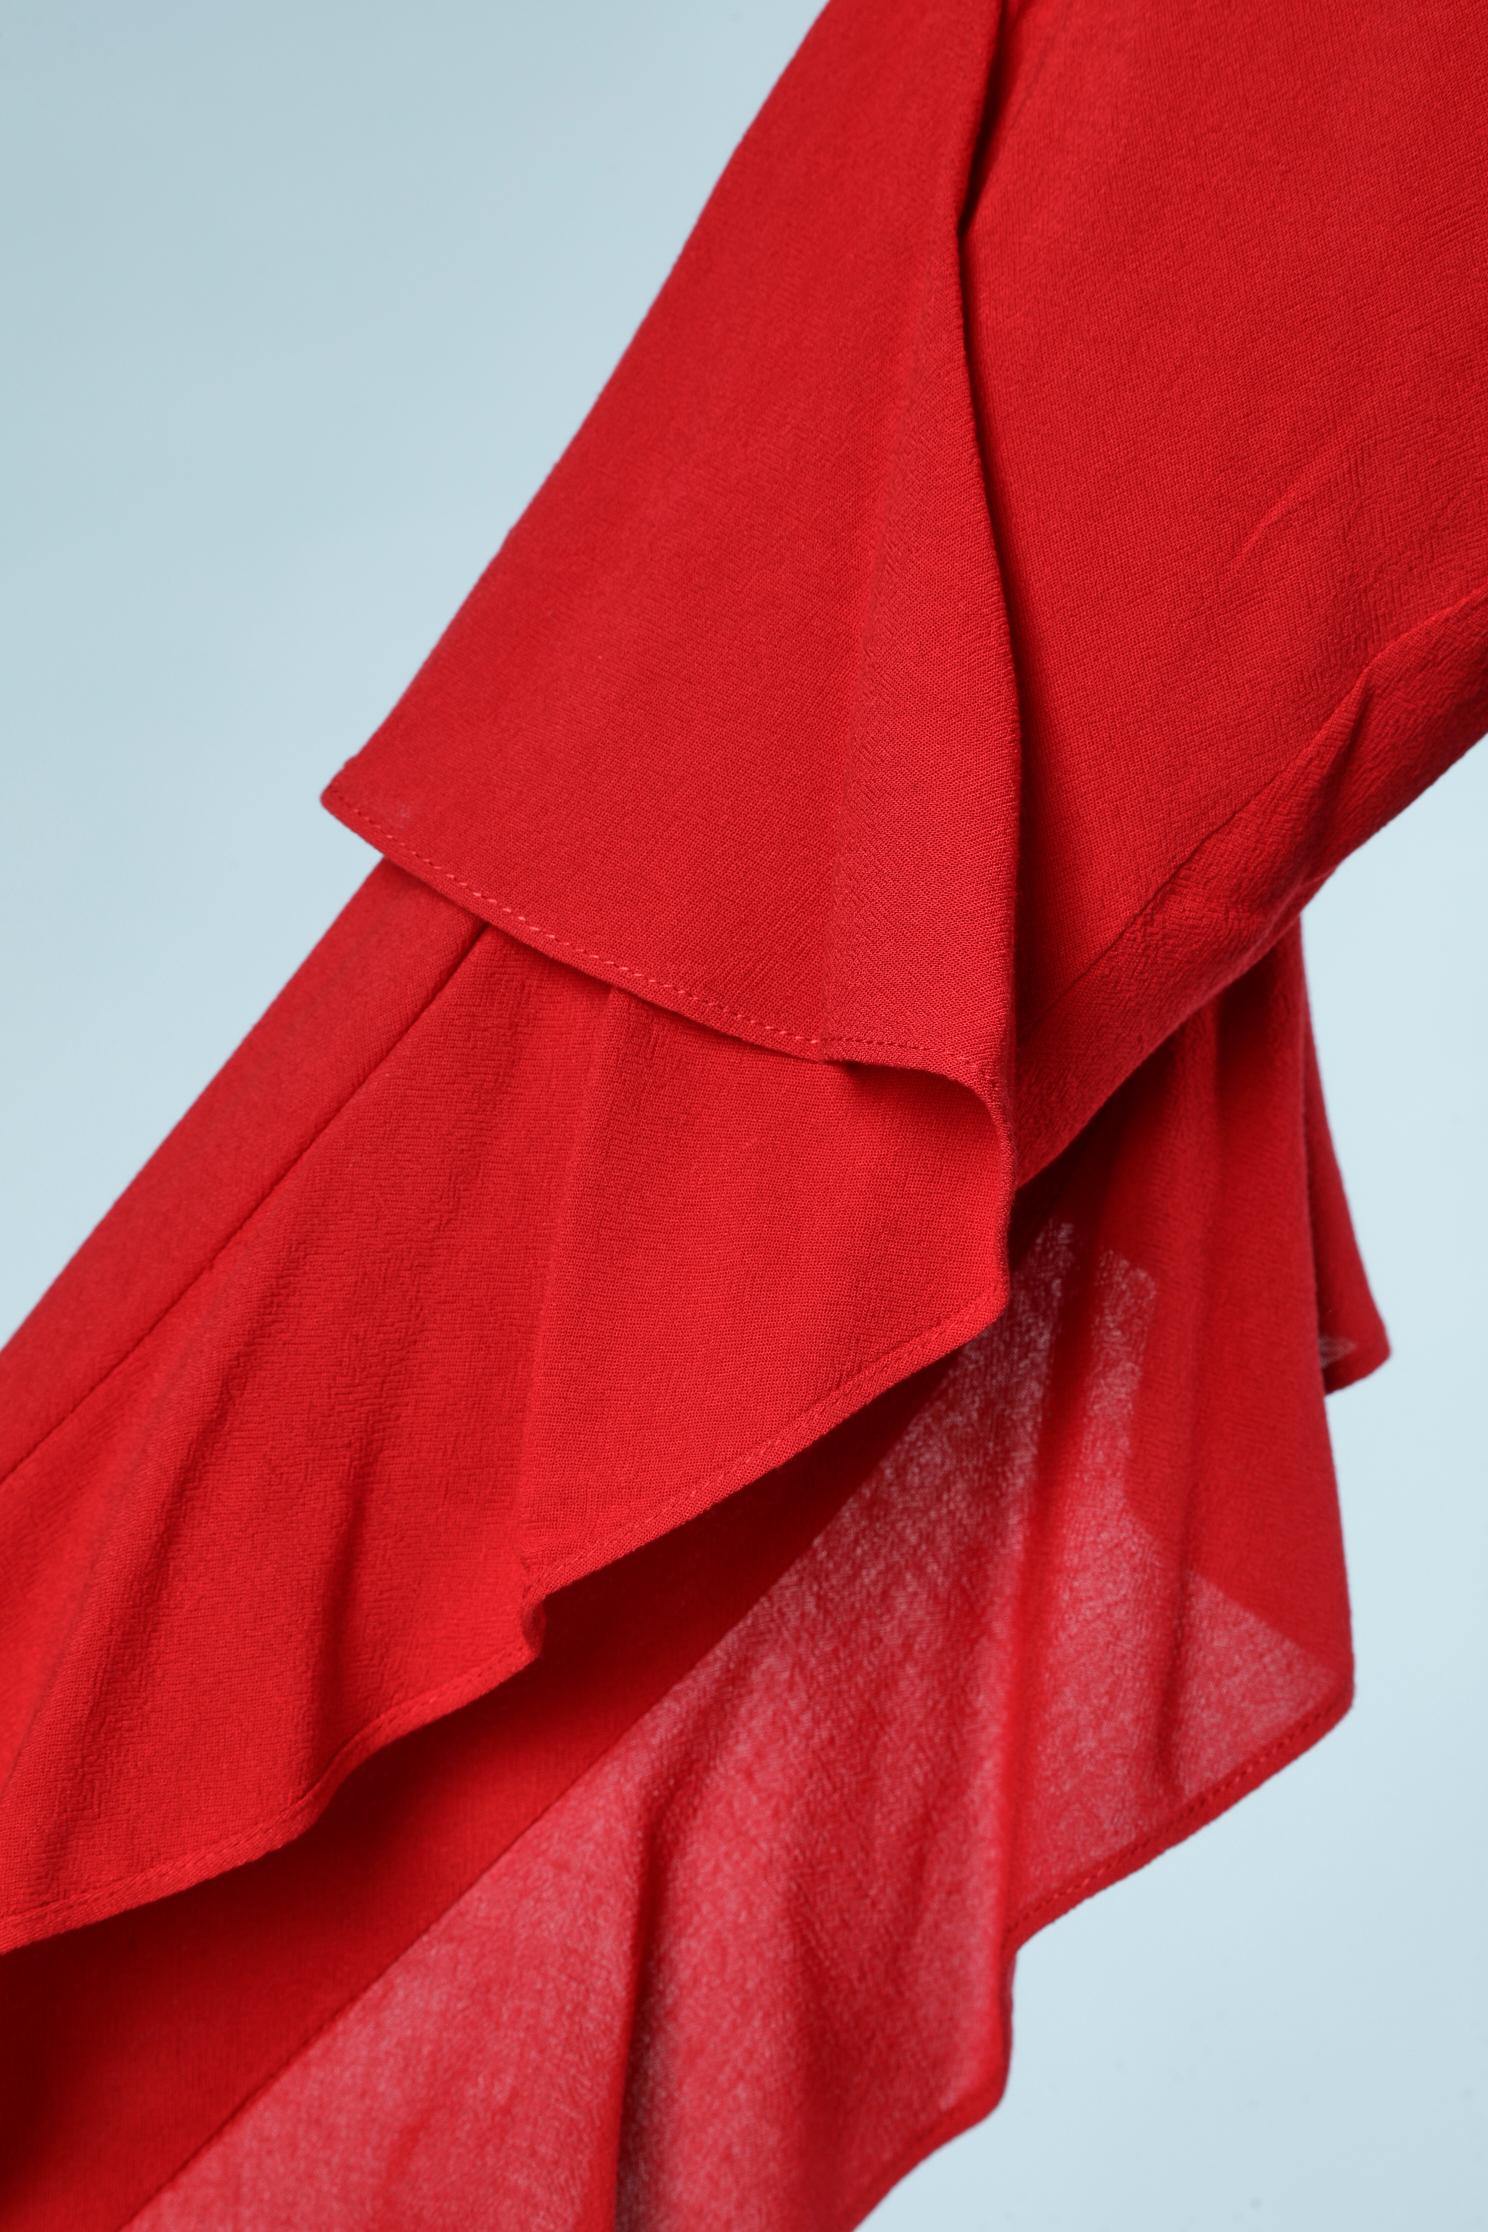 Red rayon cocktail dress with ruffles on the sleeves  In Excellent Condition For Sale In Saint-Ouen-Sur-Seine, FR